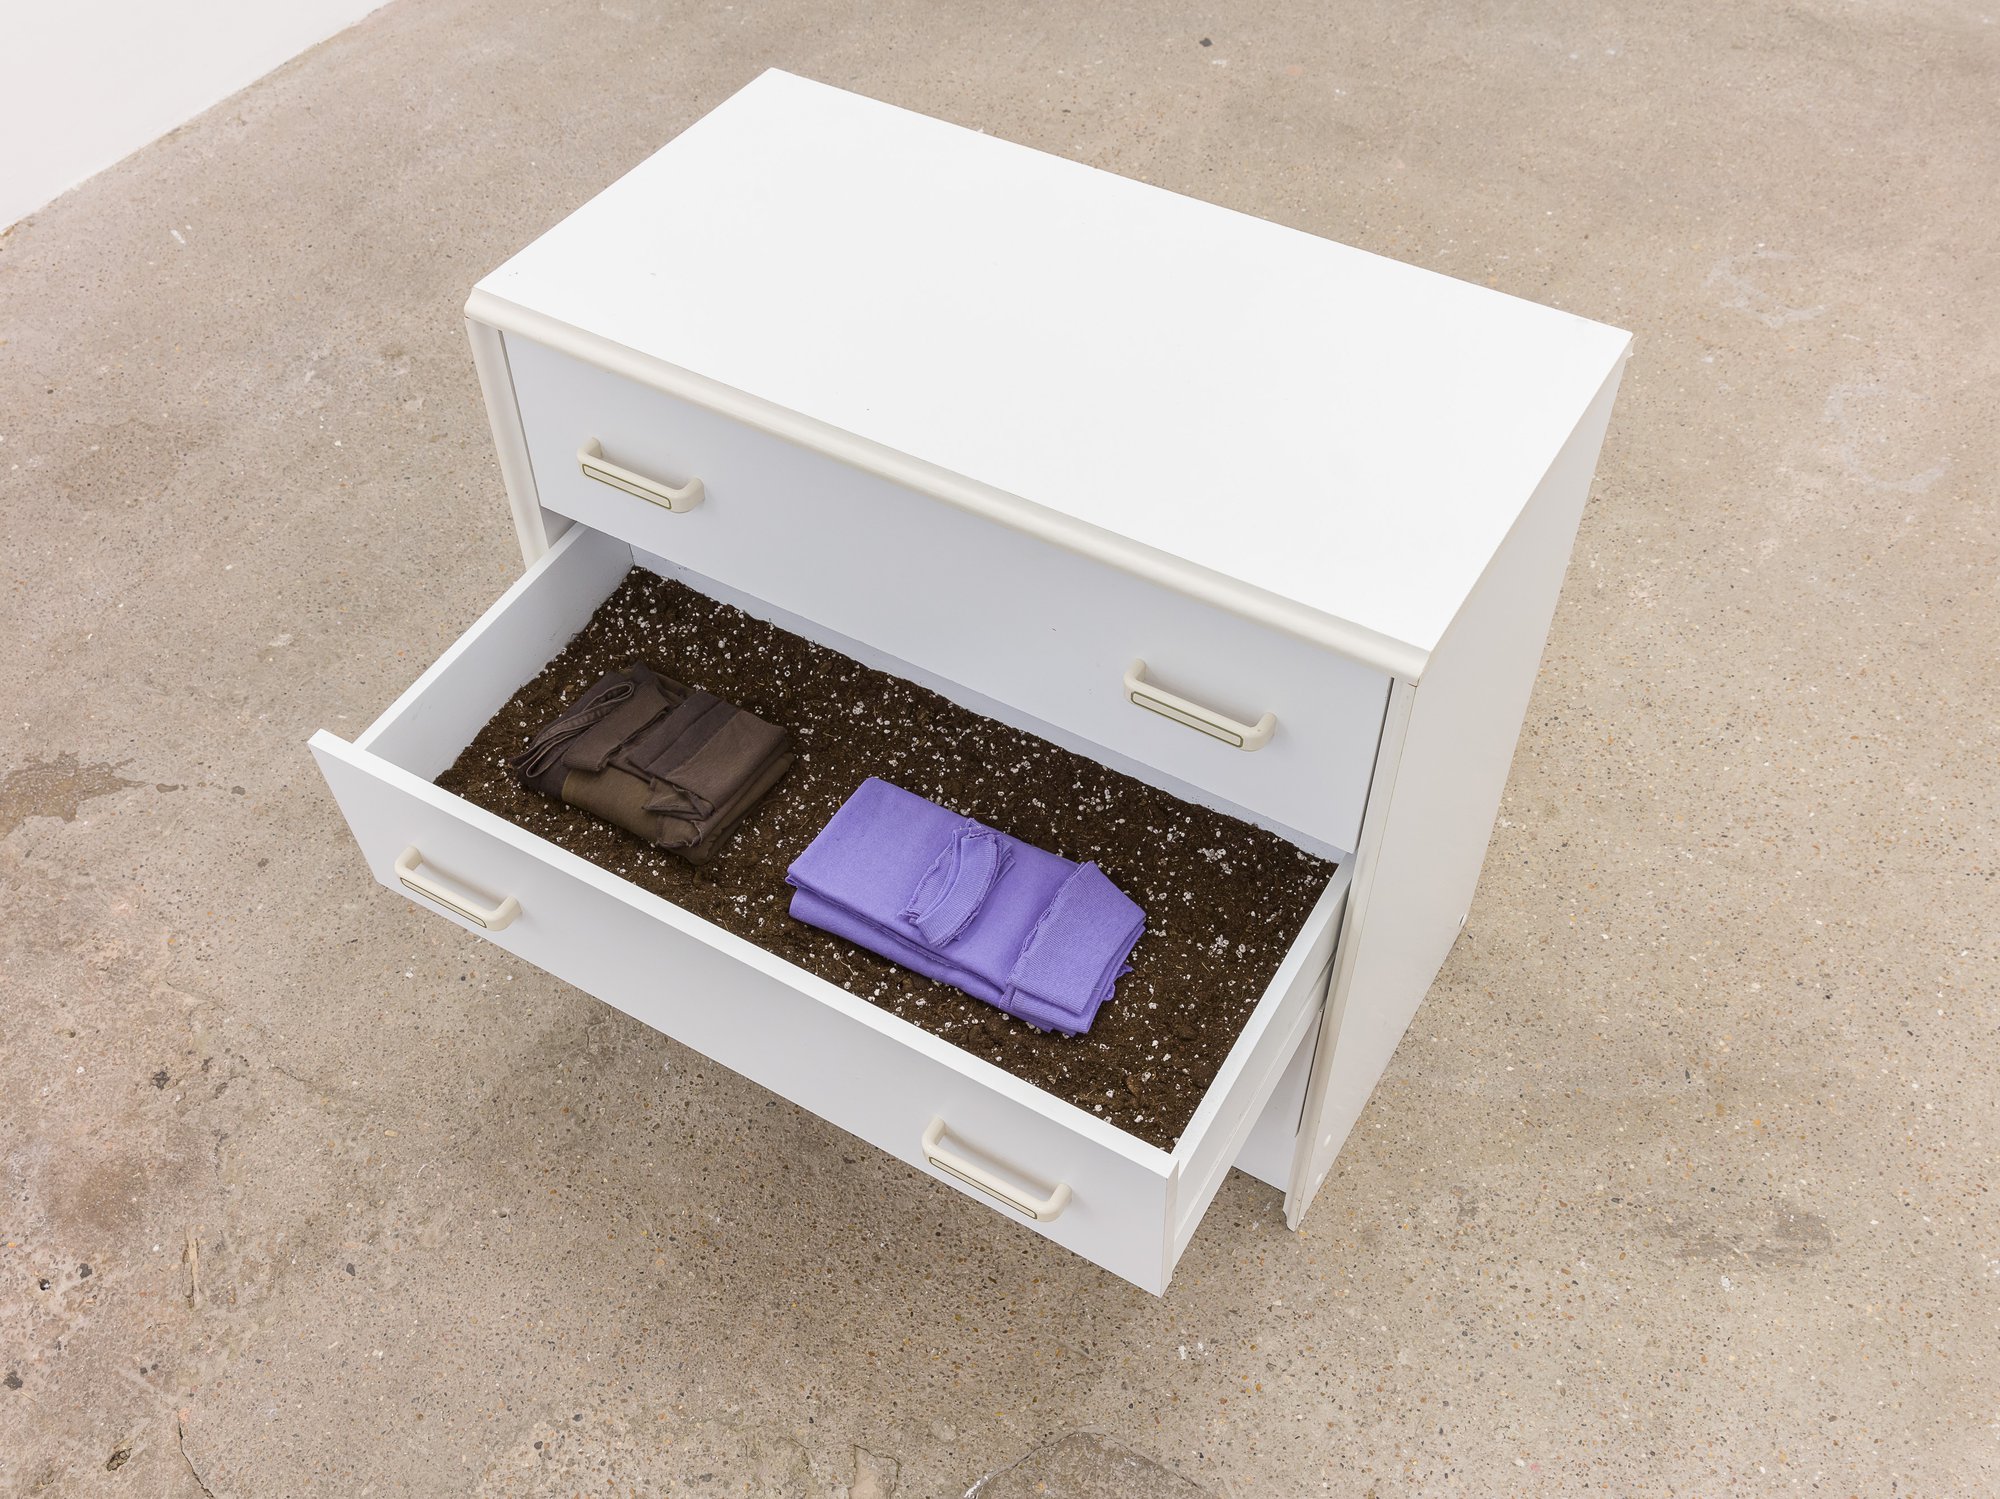 Ian Law, Untitled, chest of drawers, ceramic by Marianne Measures (1970-2010), potting soil, unpicked t-shirts, 69 x 76.5 x 40 cm, 2020. Installation view, Drips the Room, Piper Keys, London, 2020